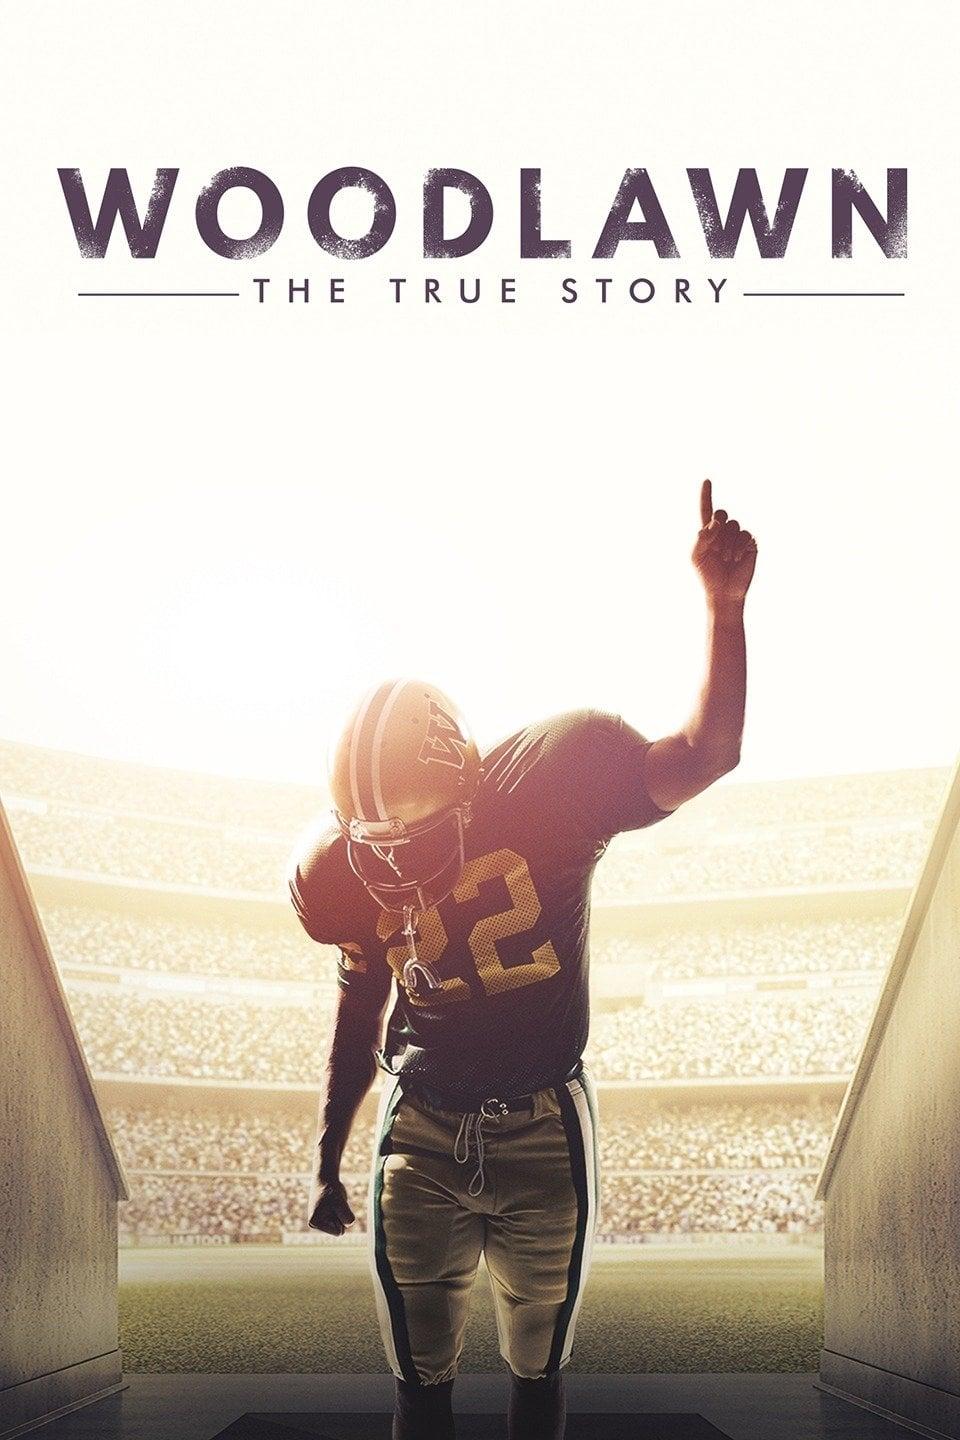 Woodlawn poster